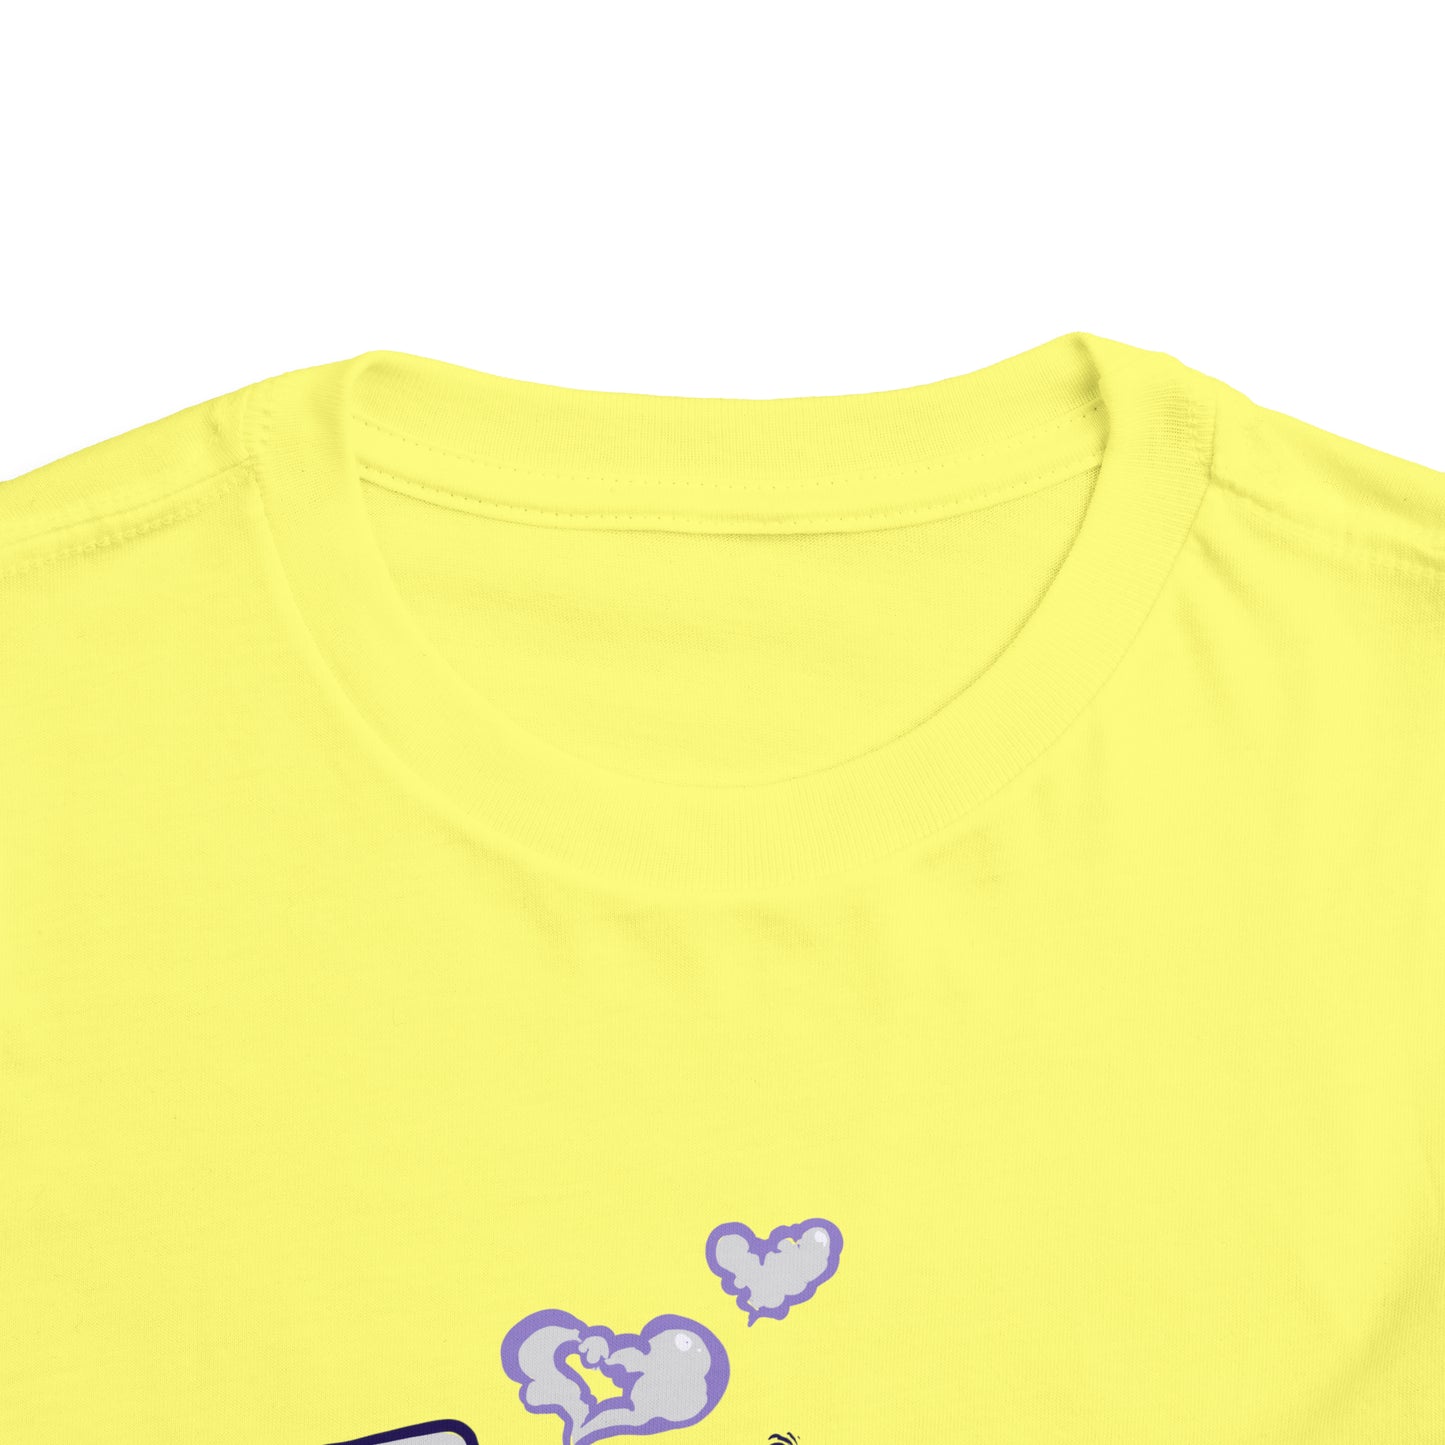 "I Choo Choose You" Toddler Tee: A Whimsical Journey in Comfort and Style!